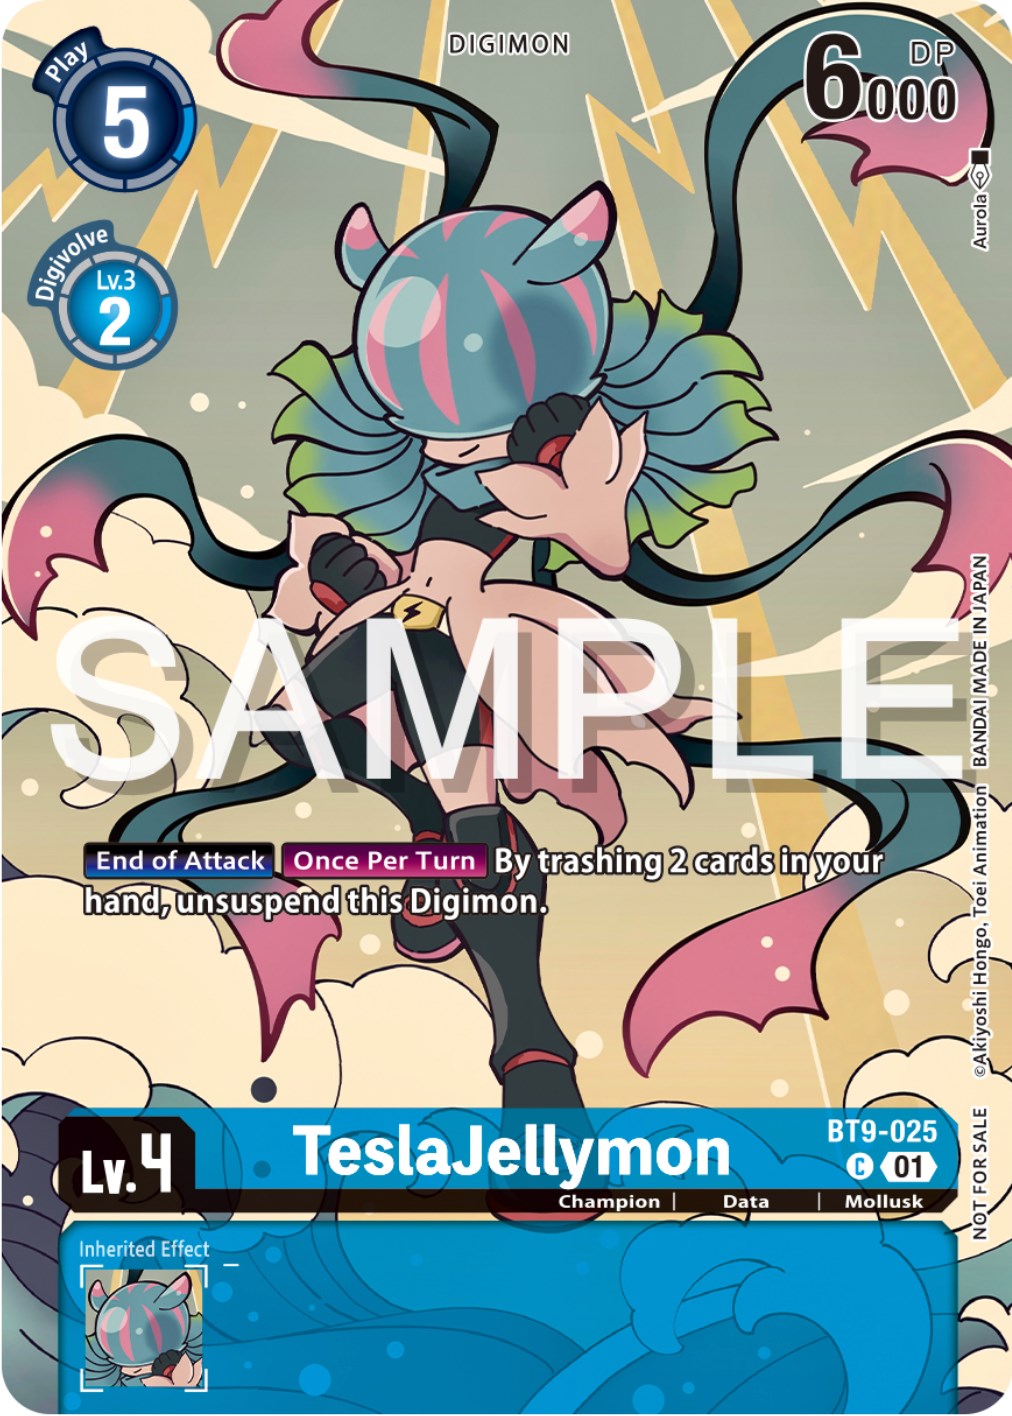 TeslaJellymon [BT9-025] (Digimon Illustration Competition Pack 2023) [X Record Promos] | The Time Vault CA